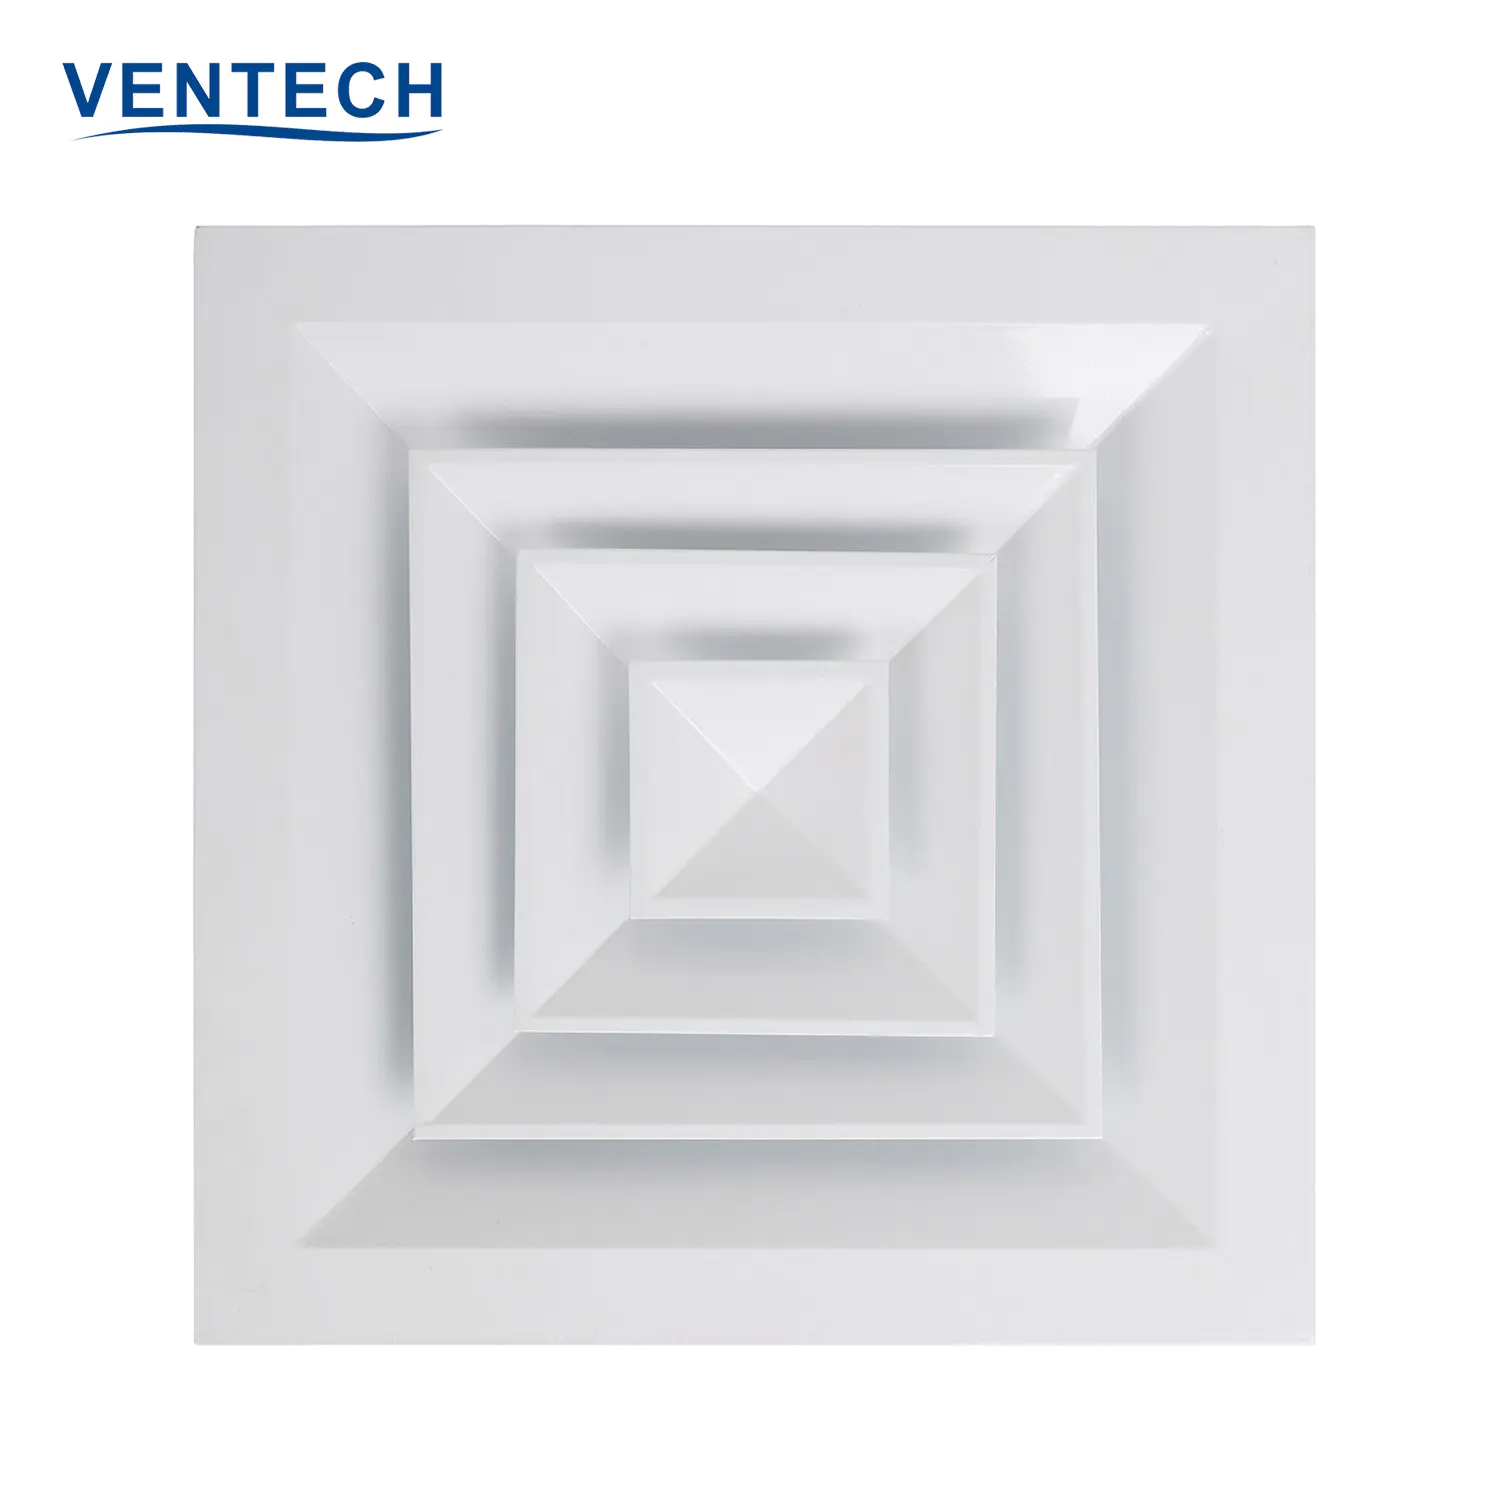 VENTECH Hvac System Exhaust Square Conditioning Outlet Aluminium Ceiling Air Duct Diffuser